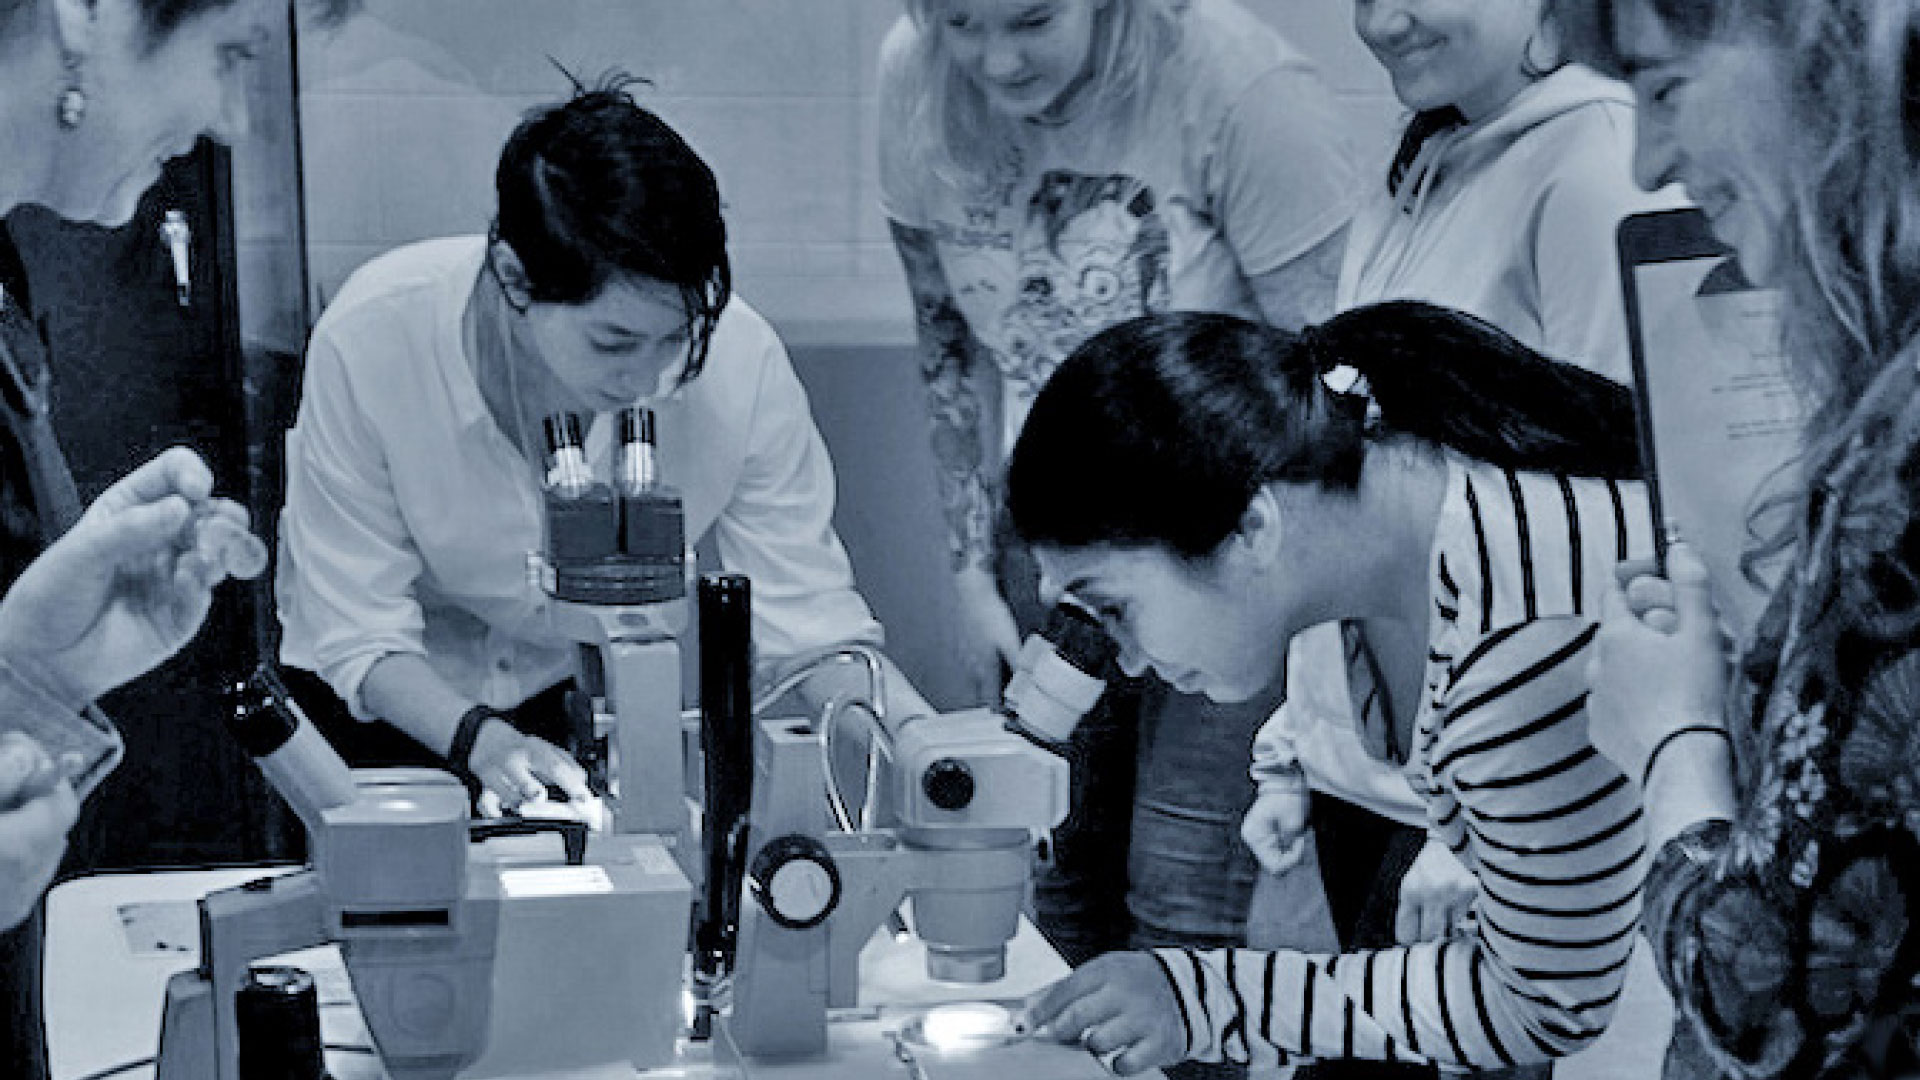 Two students look through microscopes as others look on